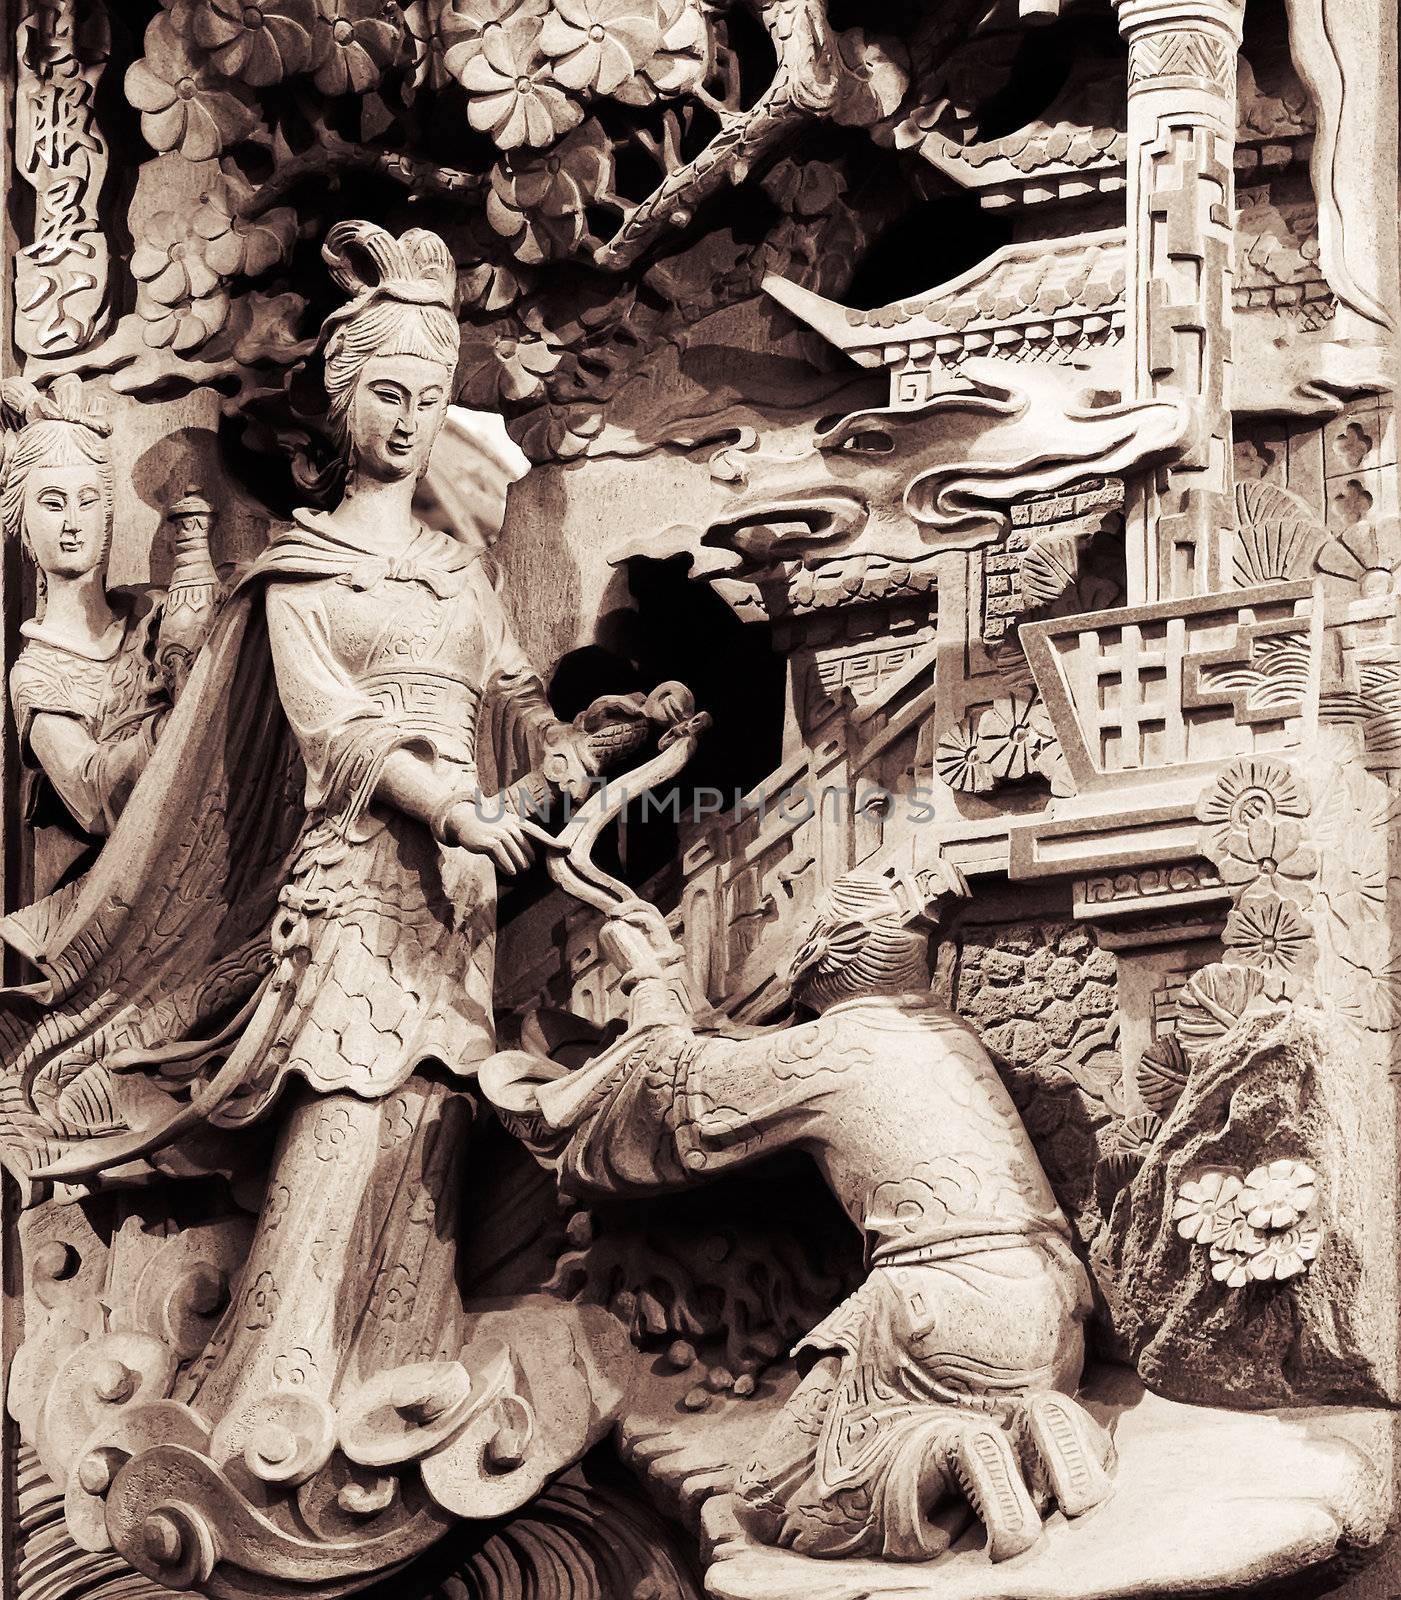 It is a stong carving of Taiwan. Maybe had one long story and fable.